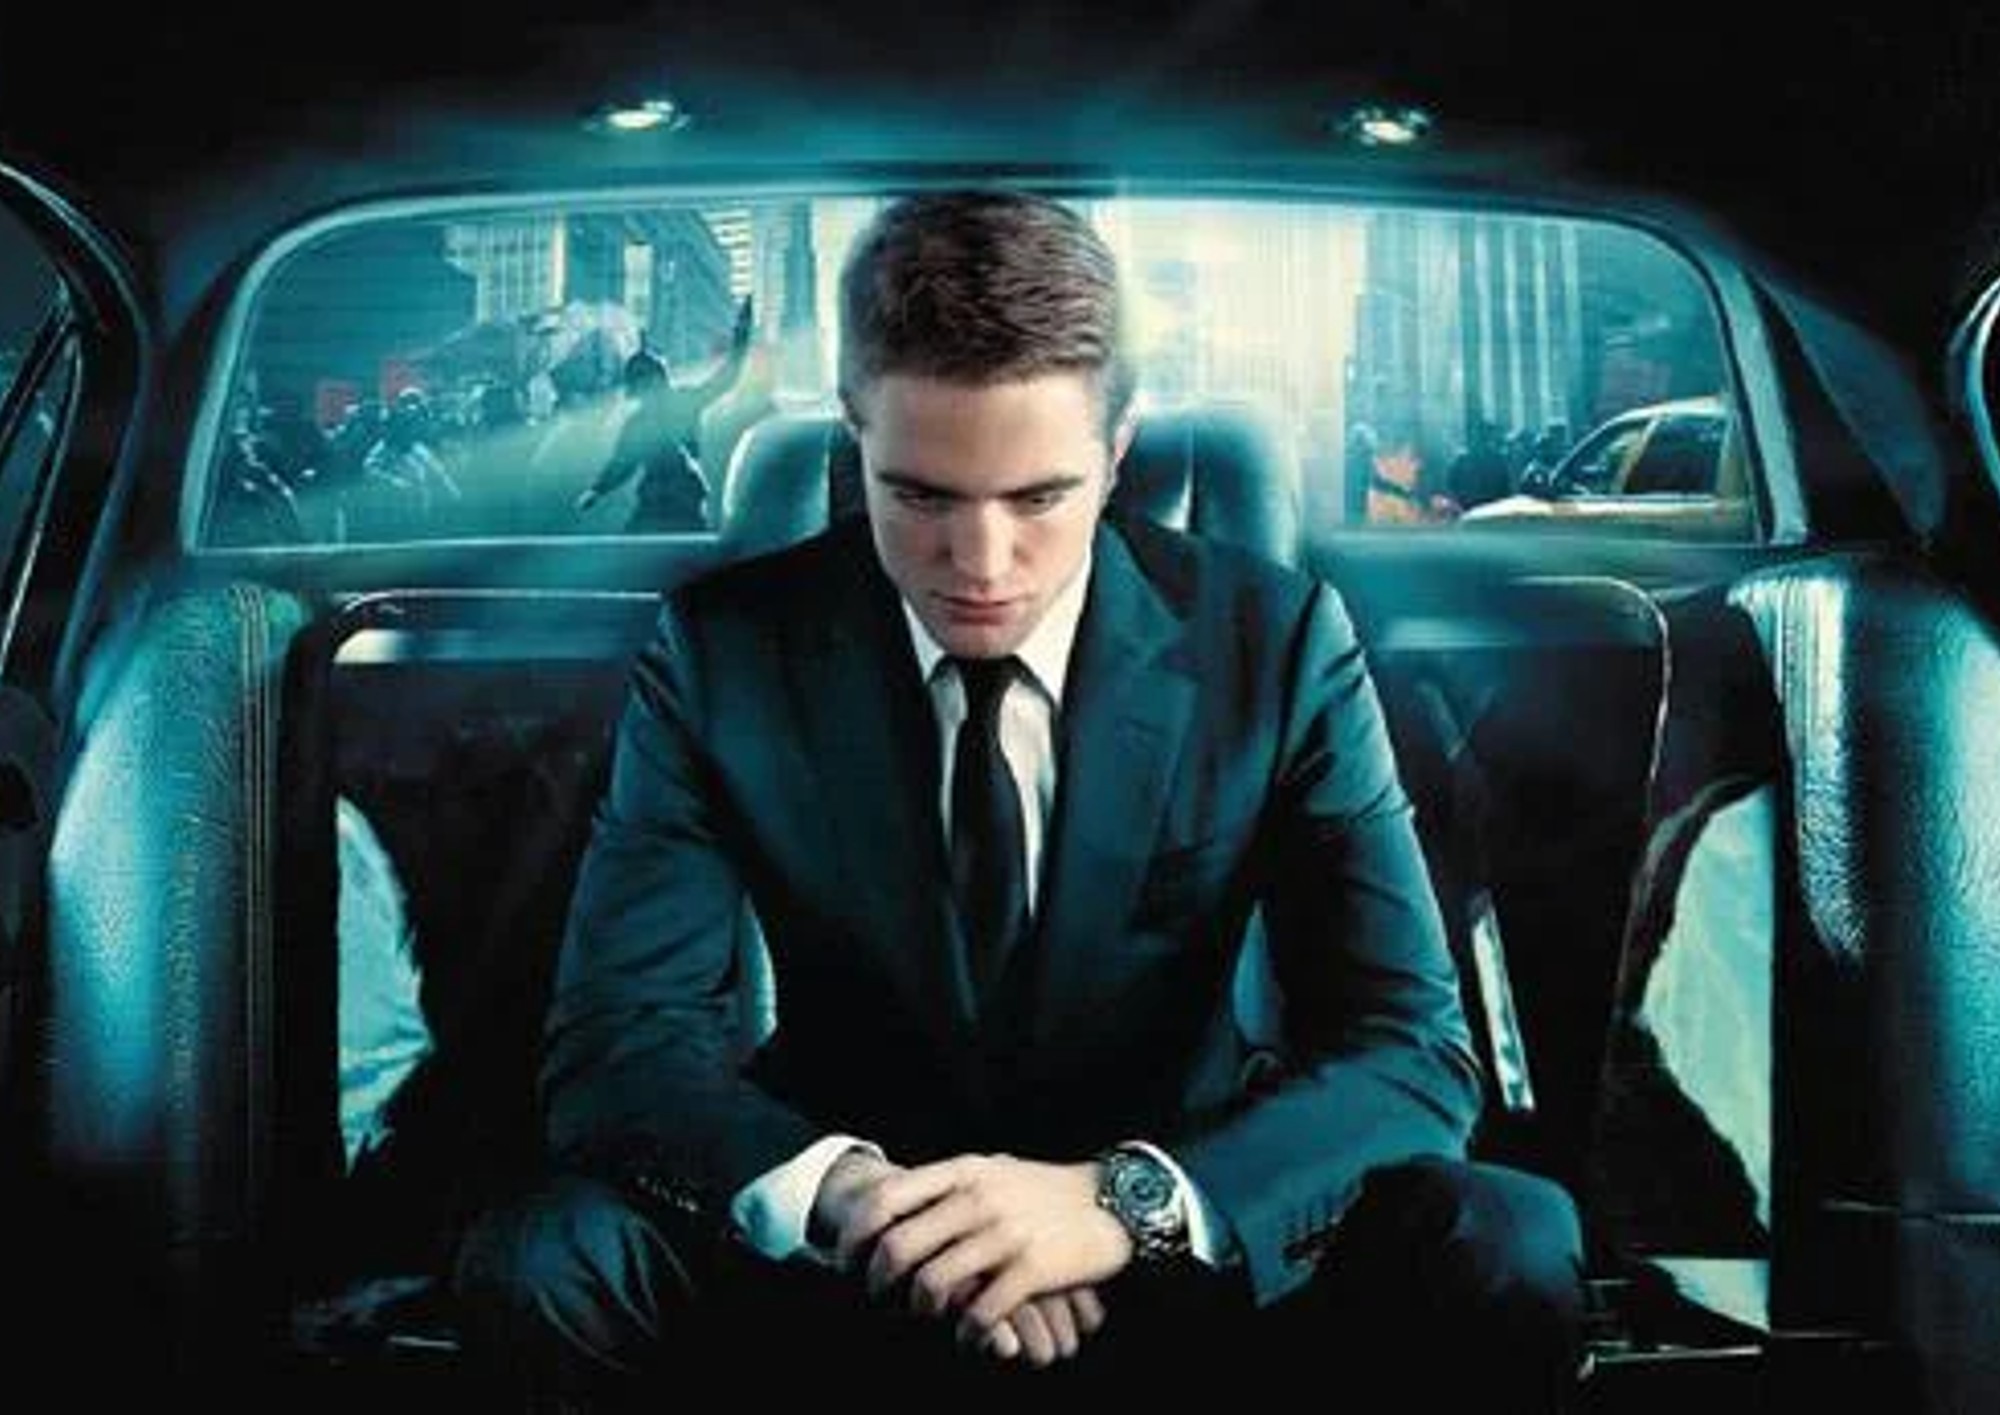 A scene from the motion picture Cosmopolis